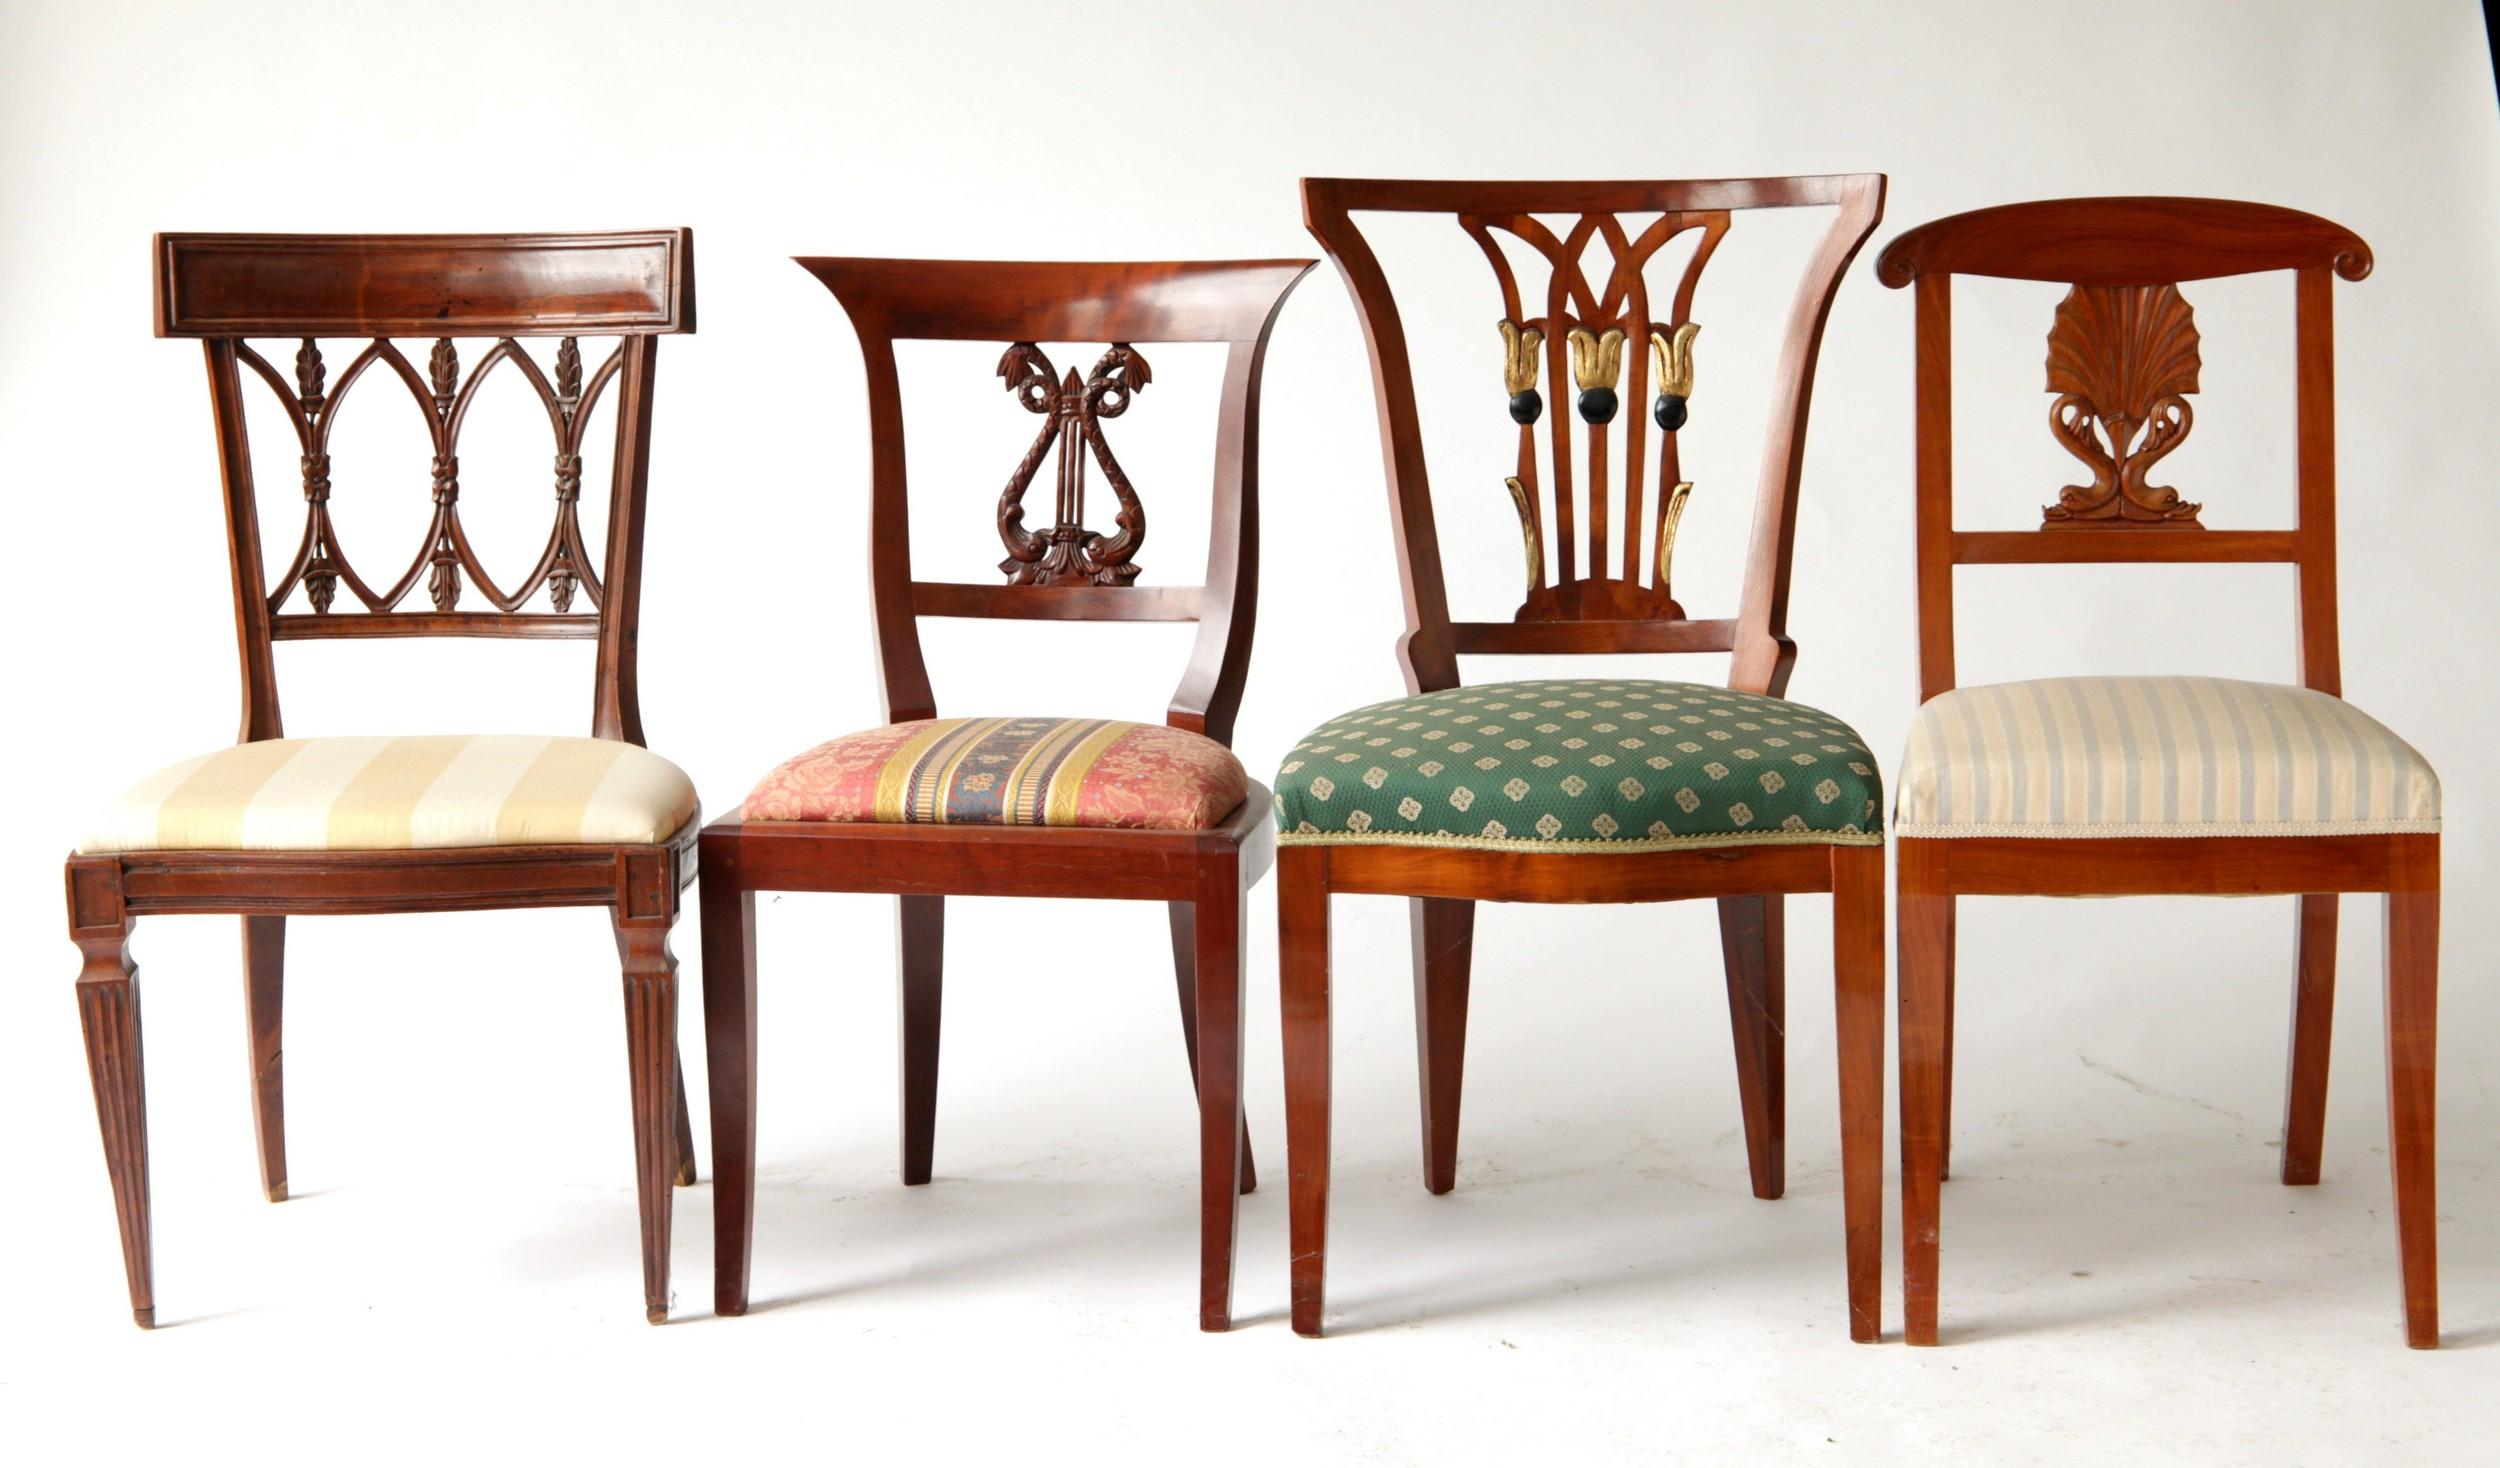 Empire set made up of eight different styles of chairs. Each variety in style and shape is gorgeous. This is the second set of its kind up for sale from the seller. 

A profusion of cherry and walnut wood, with carvings of dolphins and snakes,